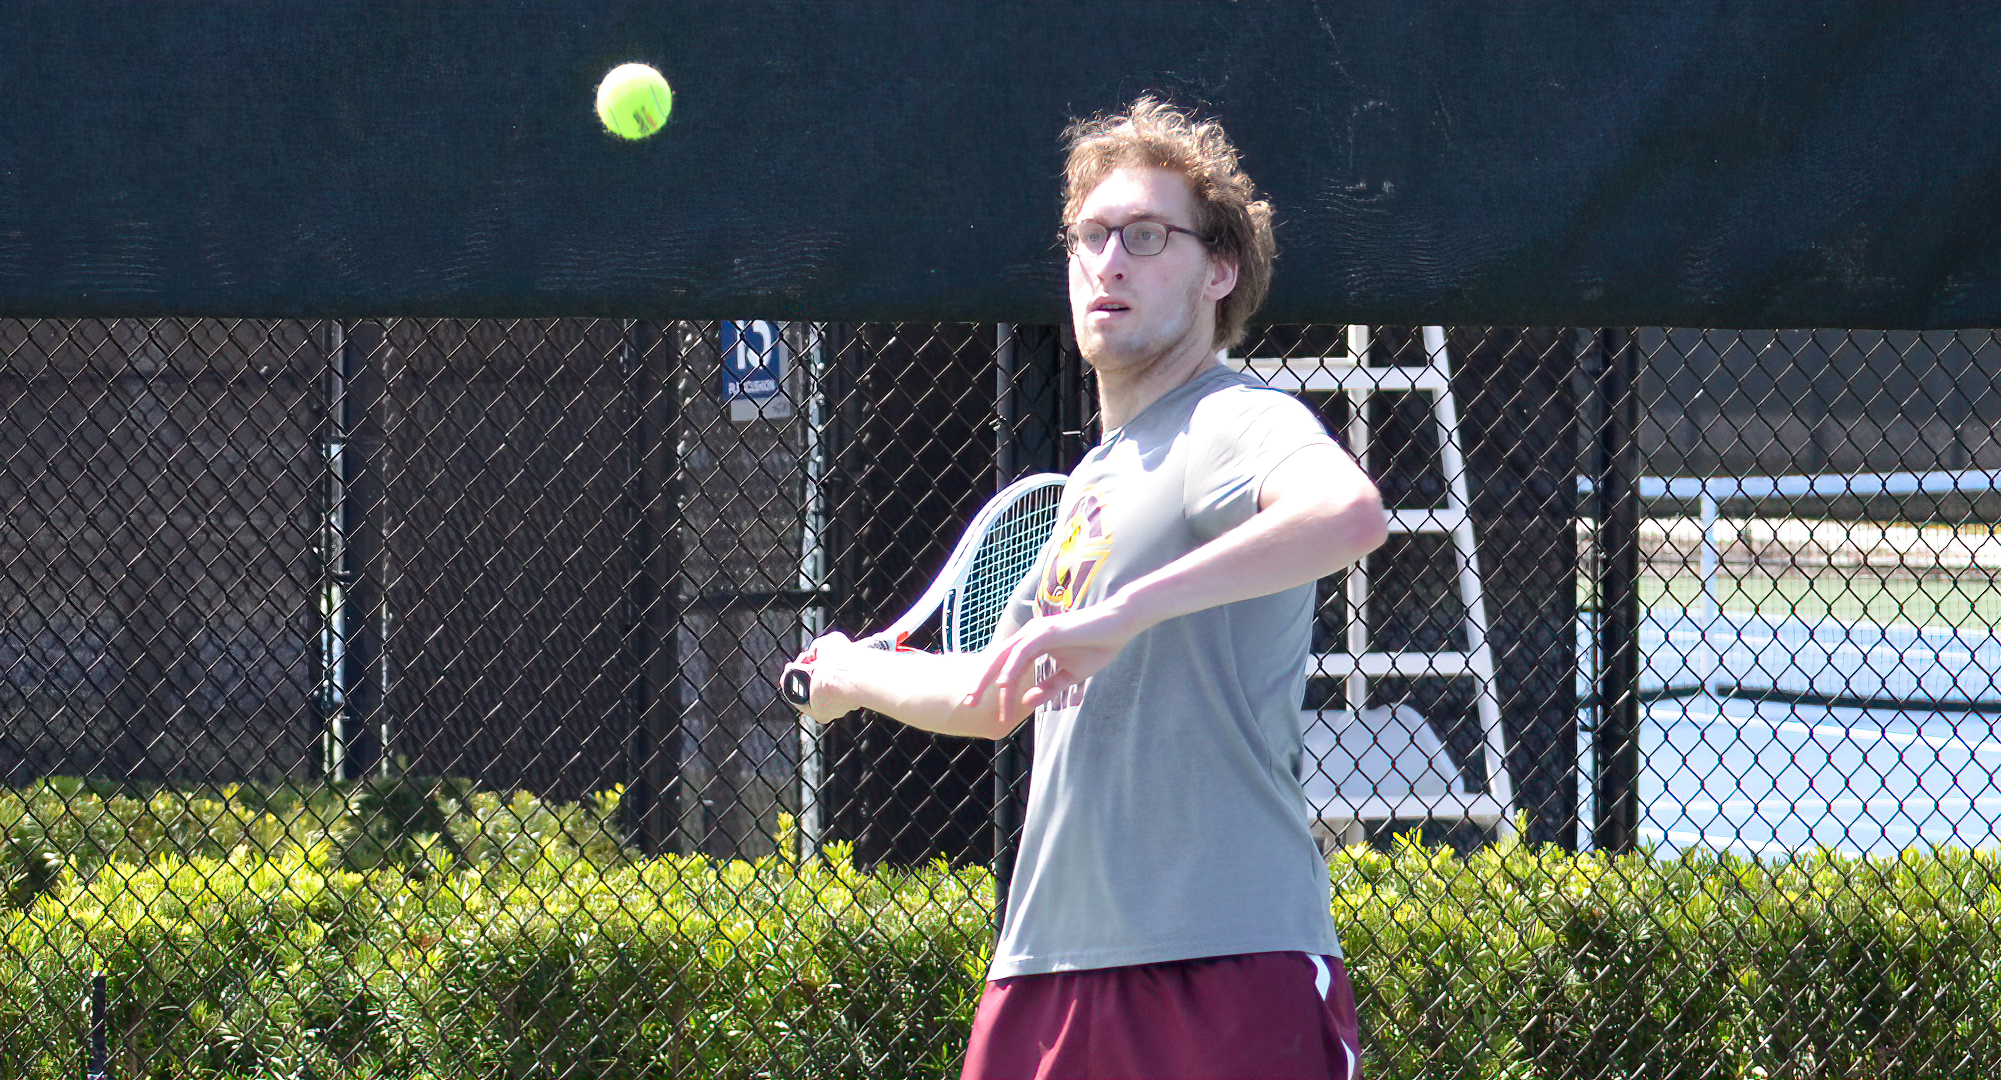 Senior Jake Peters teamed with Eli Simonson and battled through a pair of back-and-forth matches at No.1 doubles on the final day in Florida.